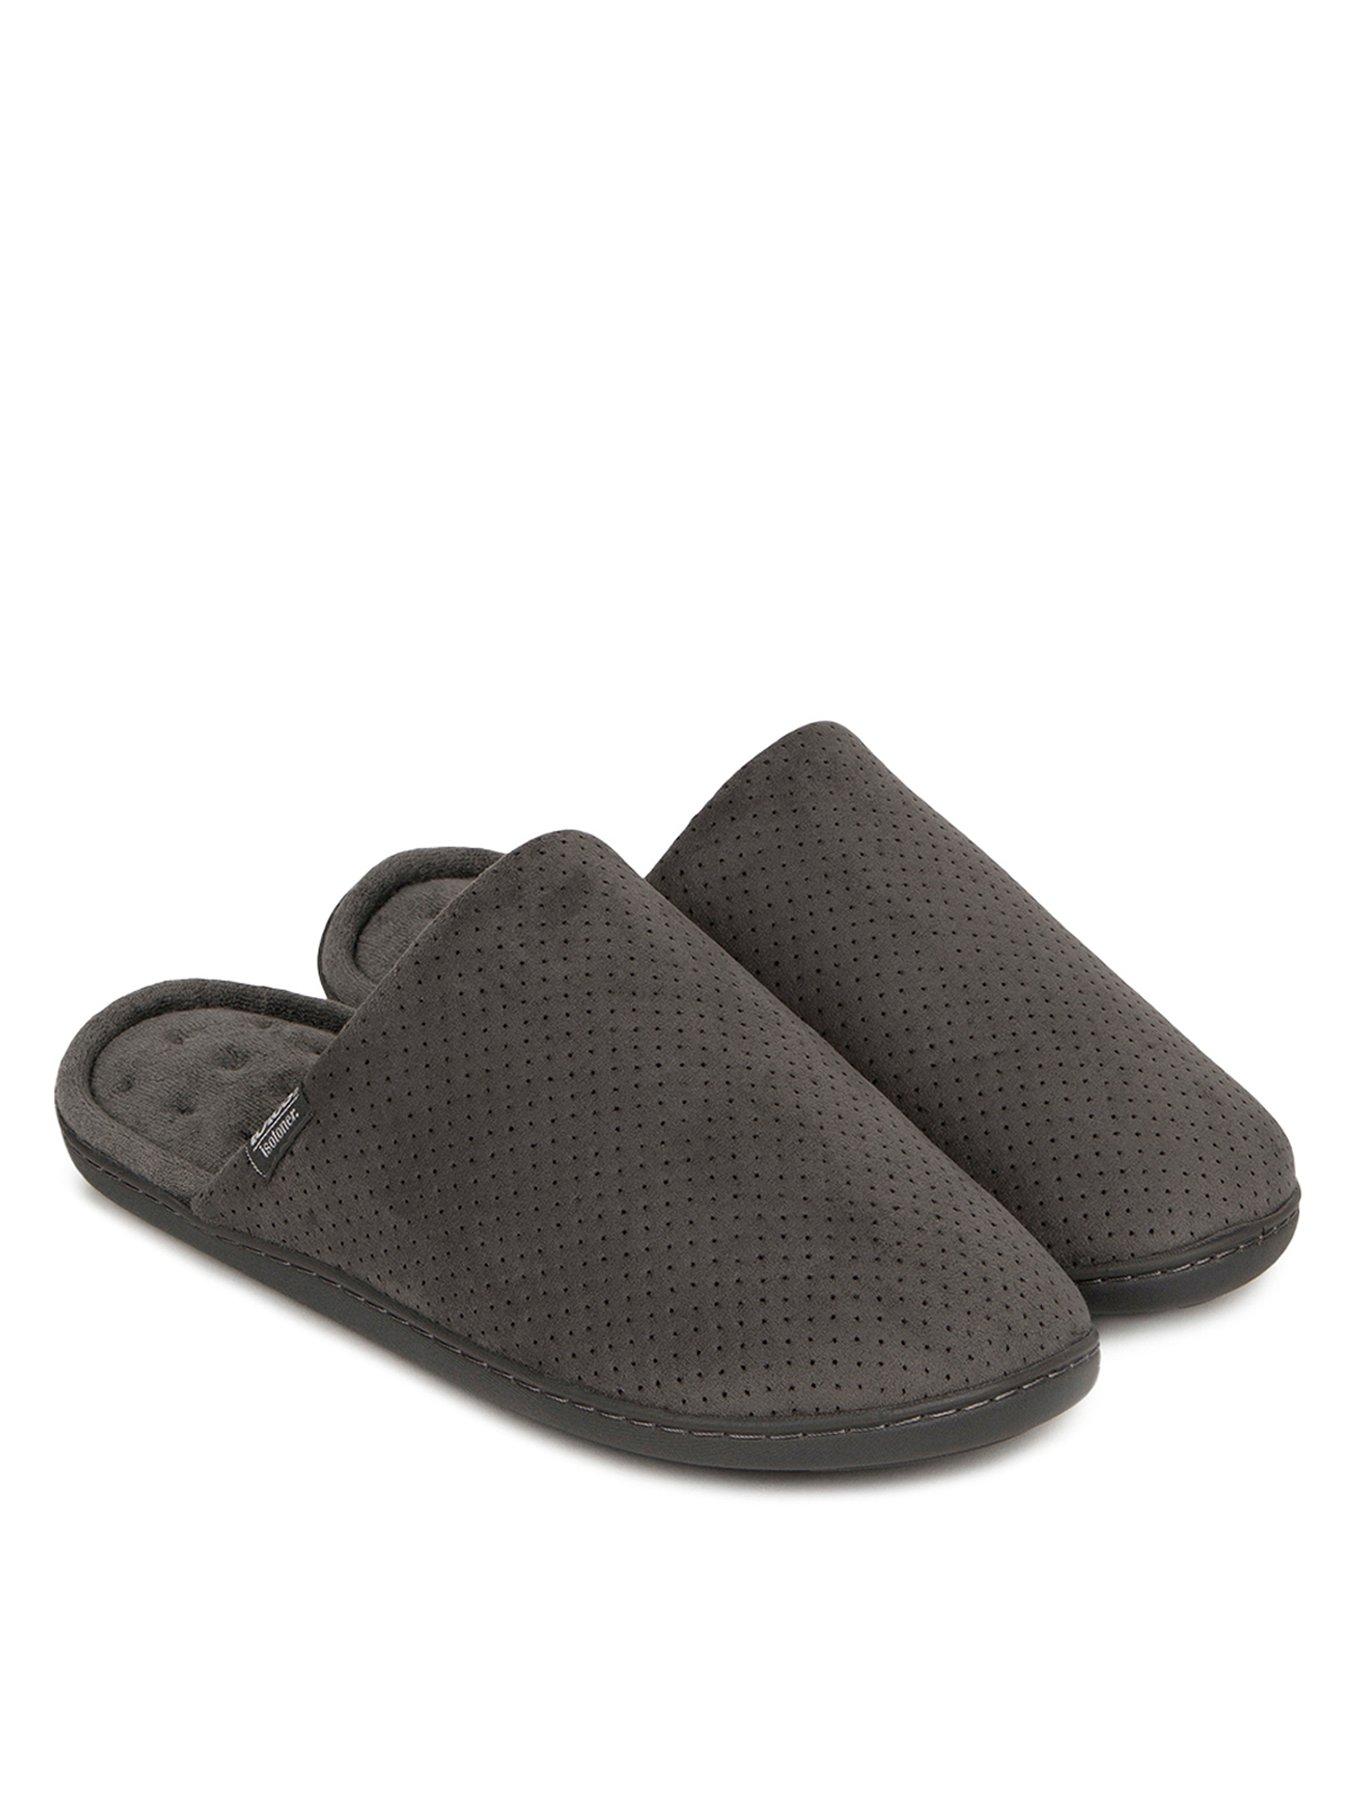 Airtex Suedette Mule Slippers with 360 Comfort & Pillowstep - Grey | Very Ireland